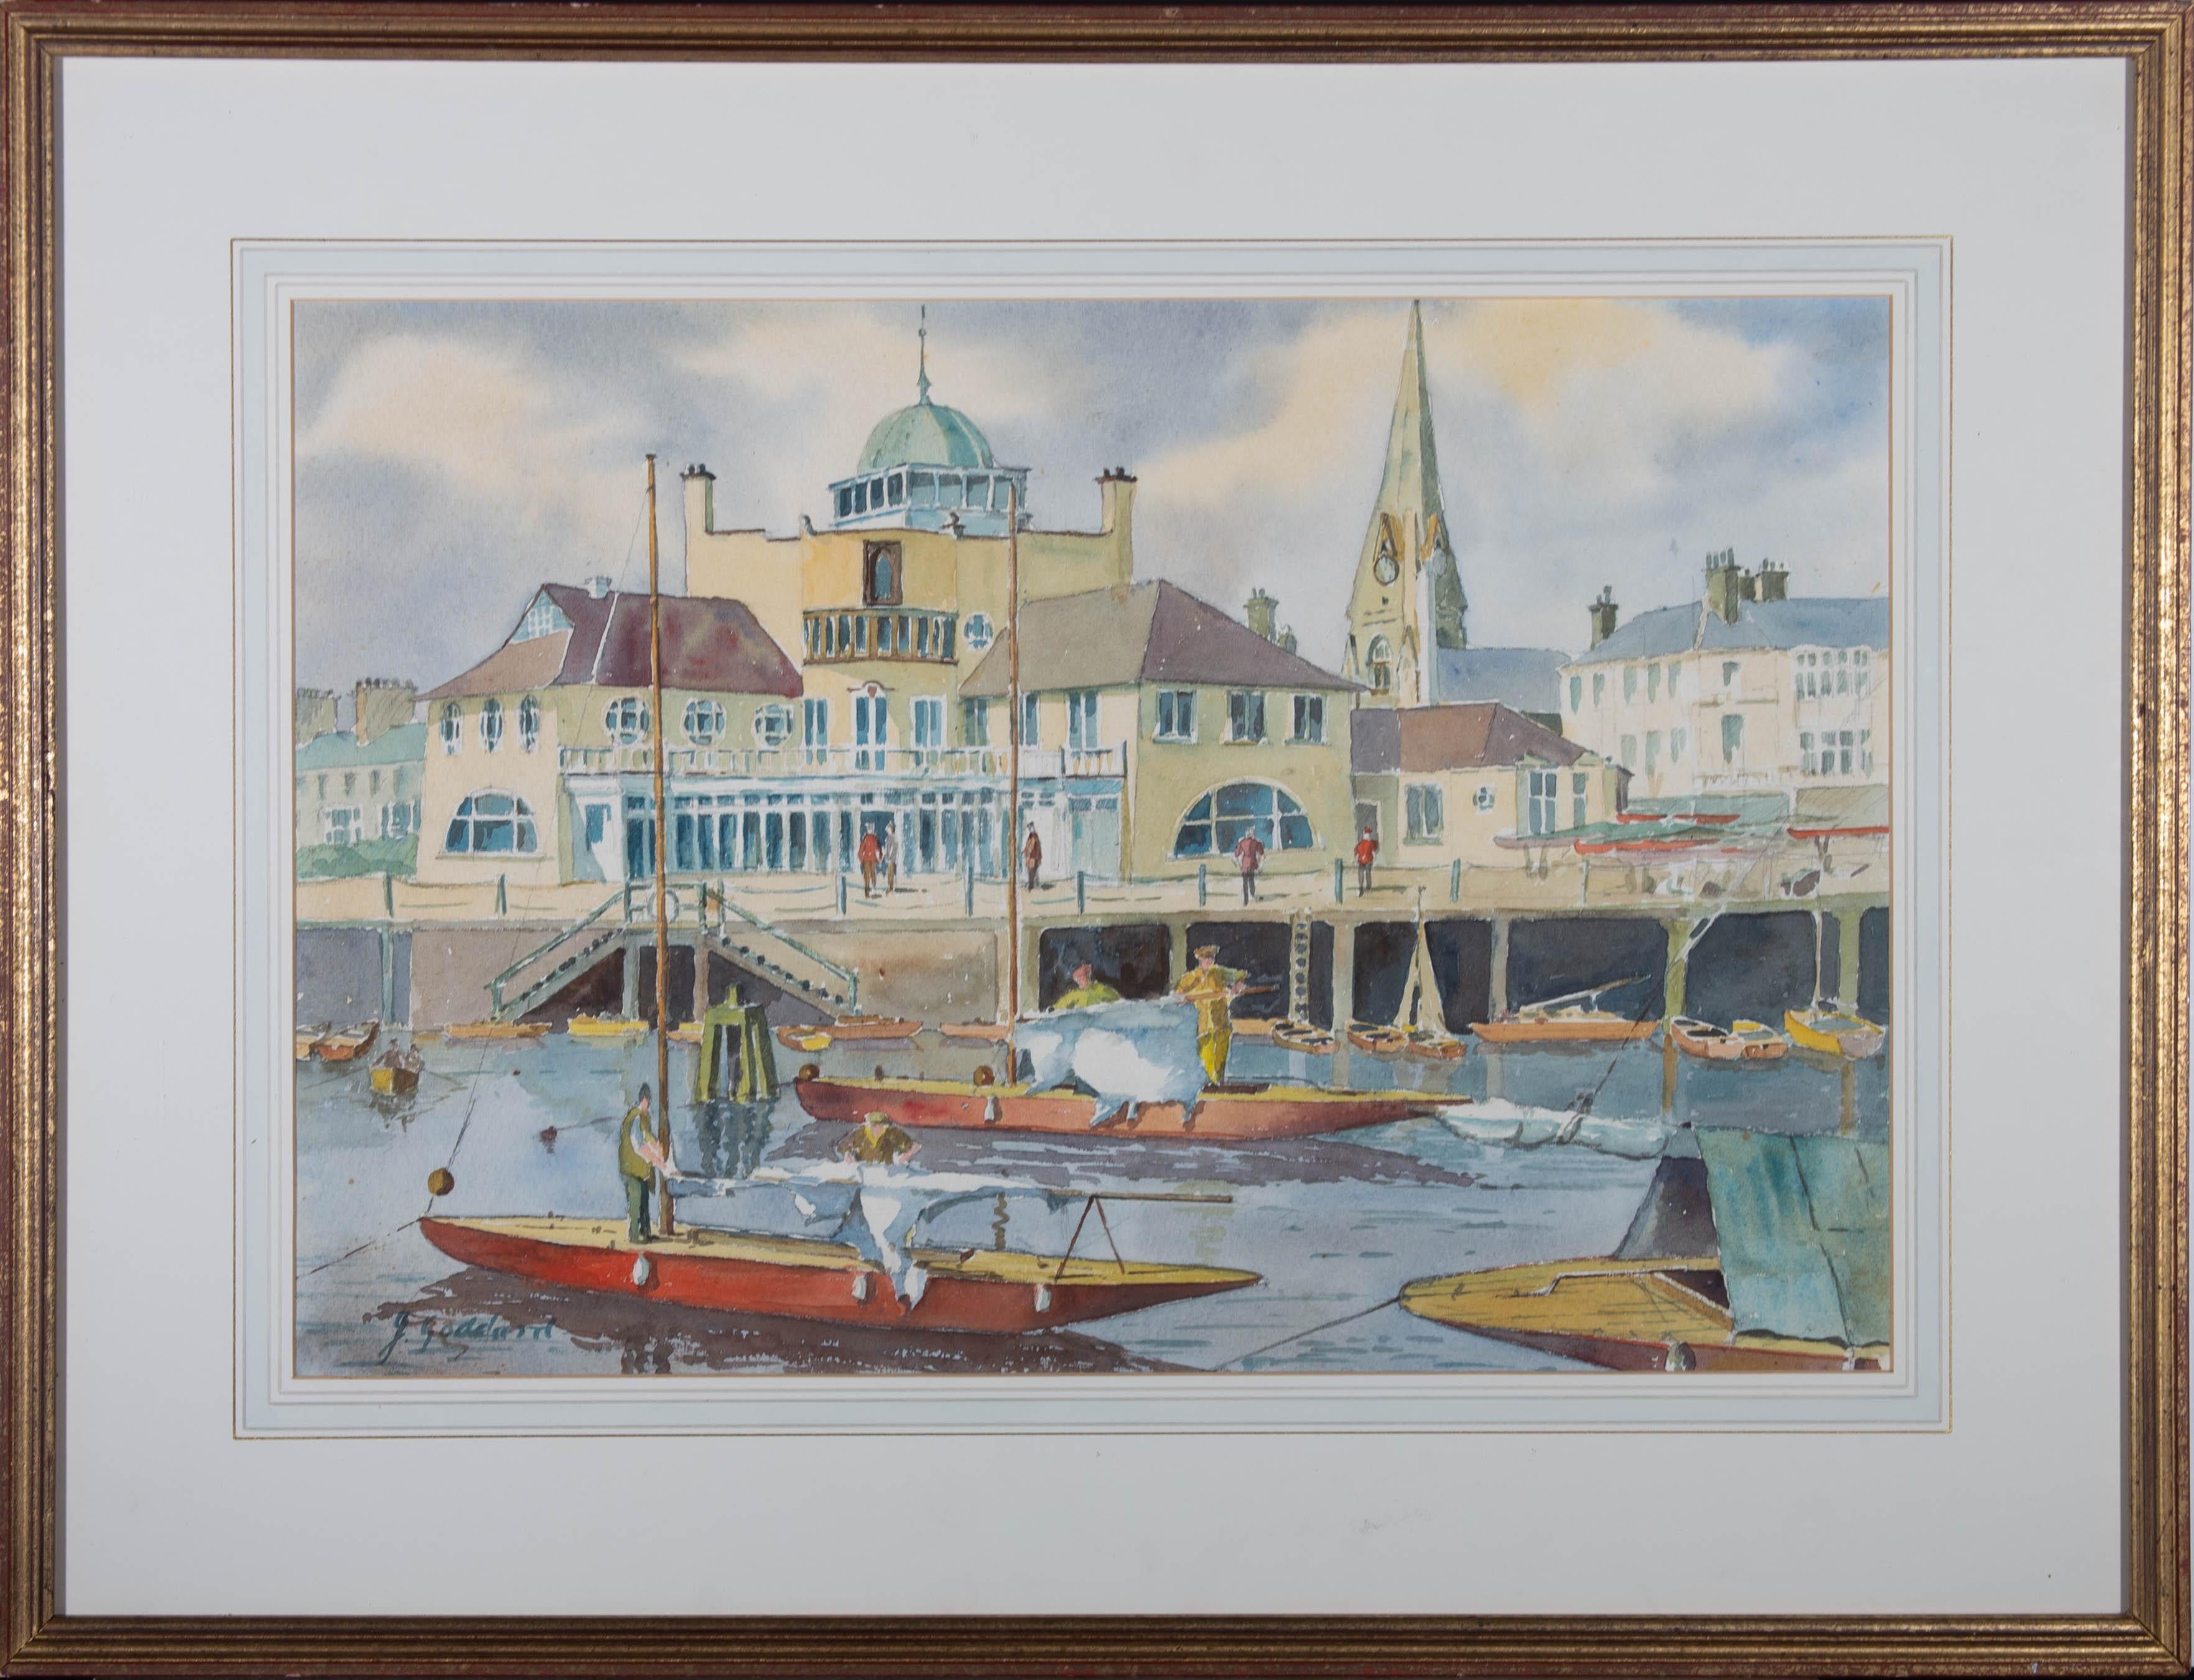 A busy scene at Lowestoft harbour with figures working on boats in the foreground. Presented in a wash line mount and a distressed gilt-effect wooden frame. Signed to the lower-left edge. On watercolour paper.
